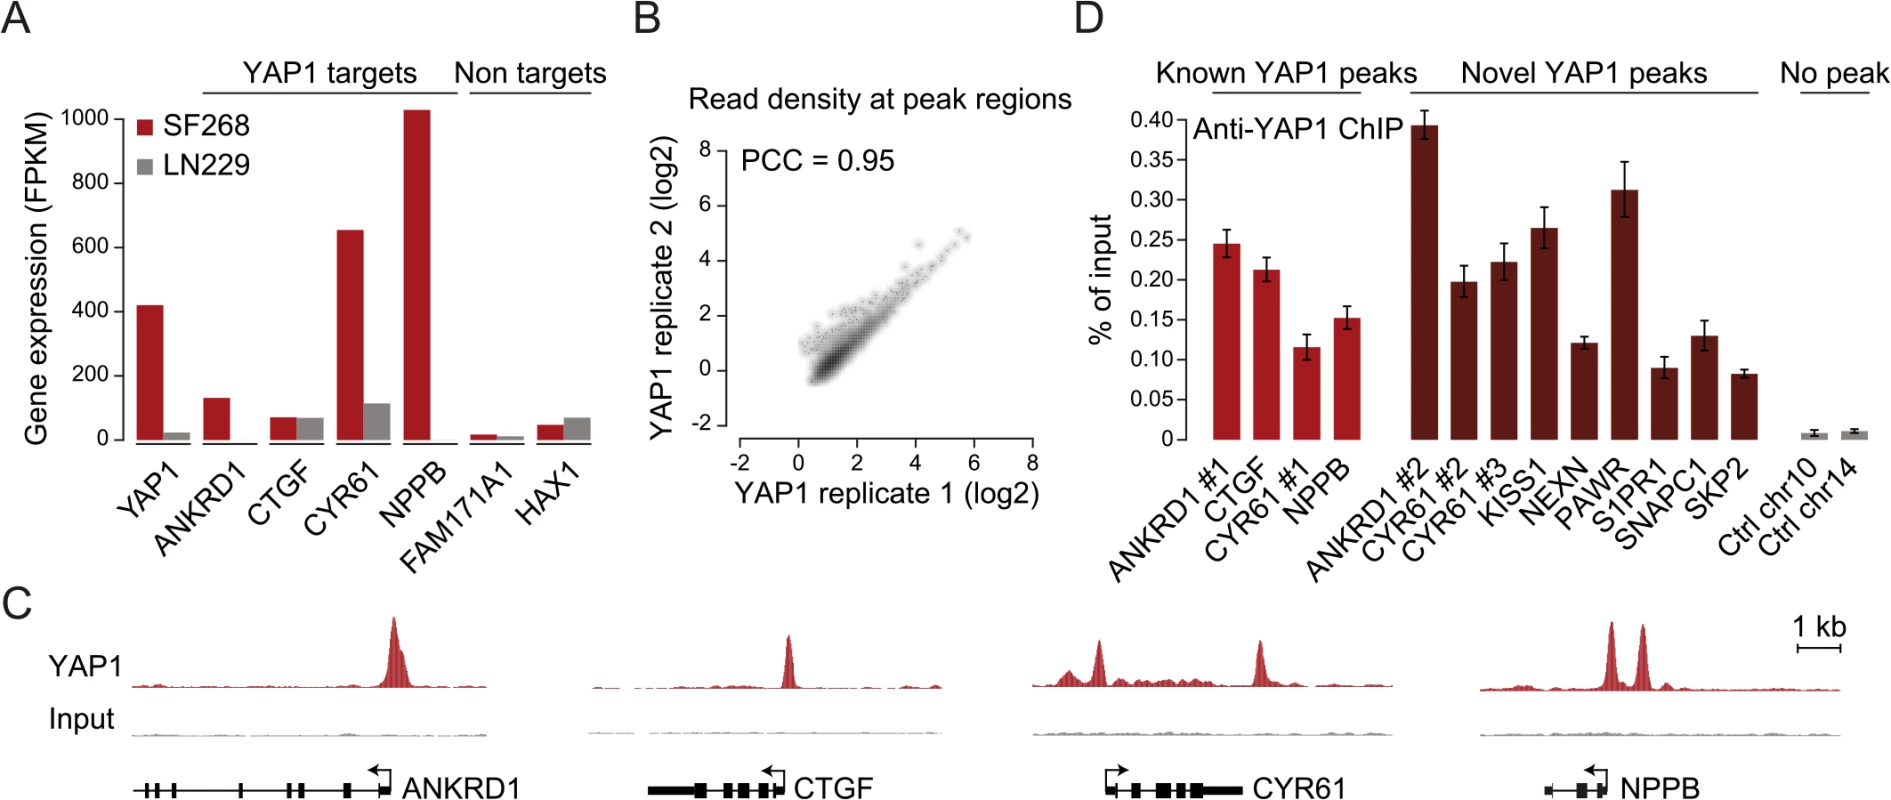 Genome-wide binding of YAP1 to chromatin in SF268 cells.